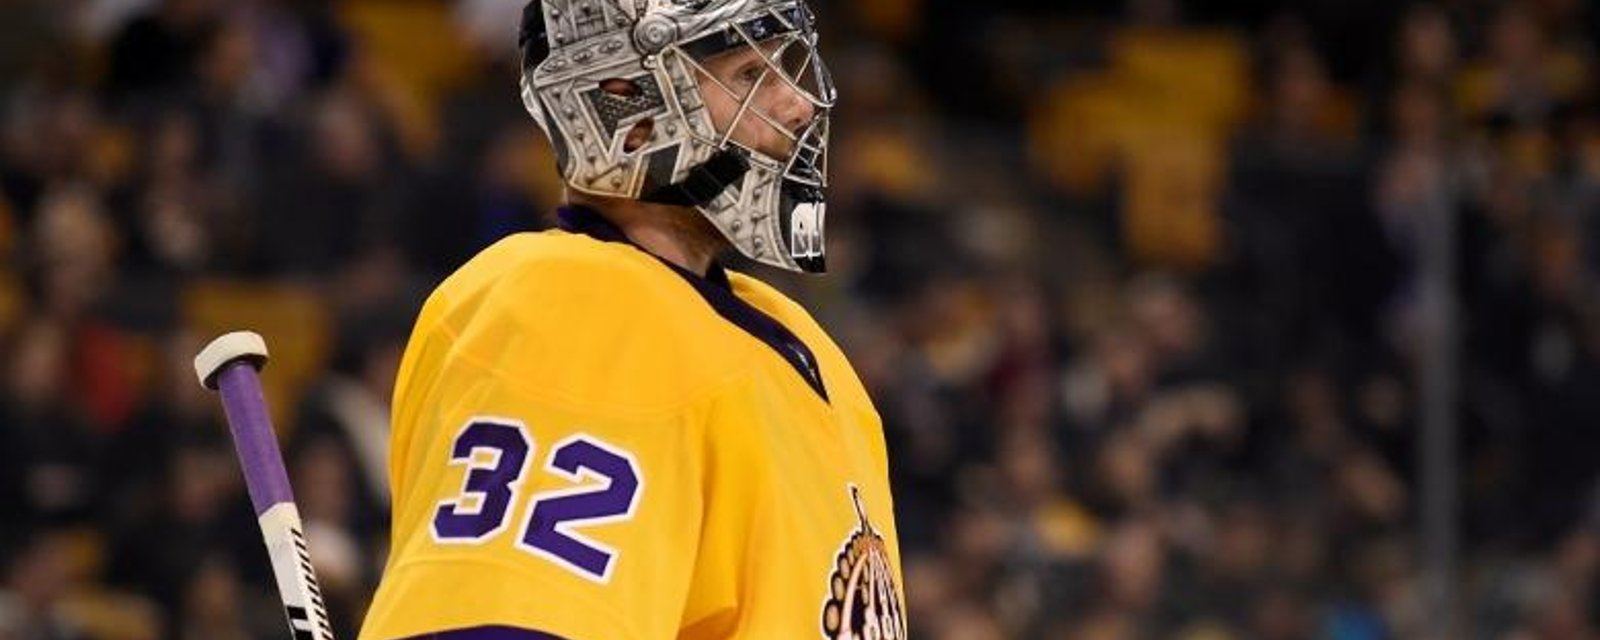 Kings decision to call up a goalie indicates Quick will miss time.